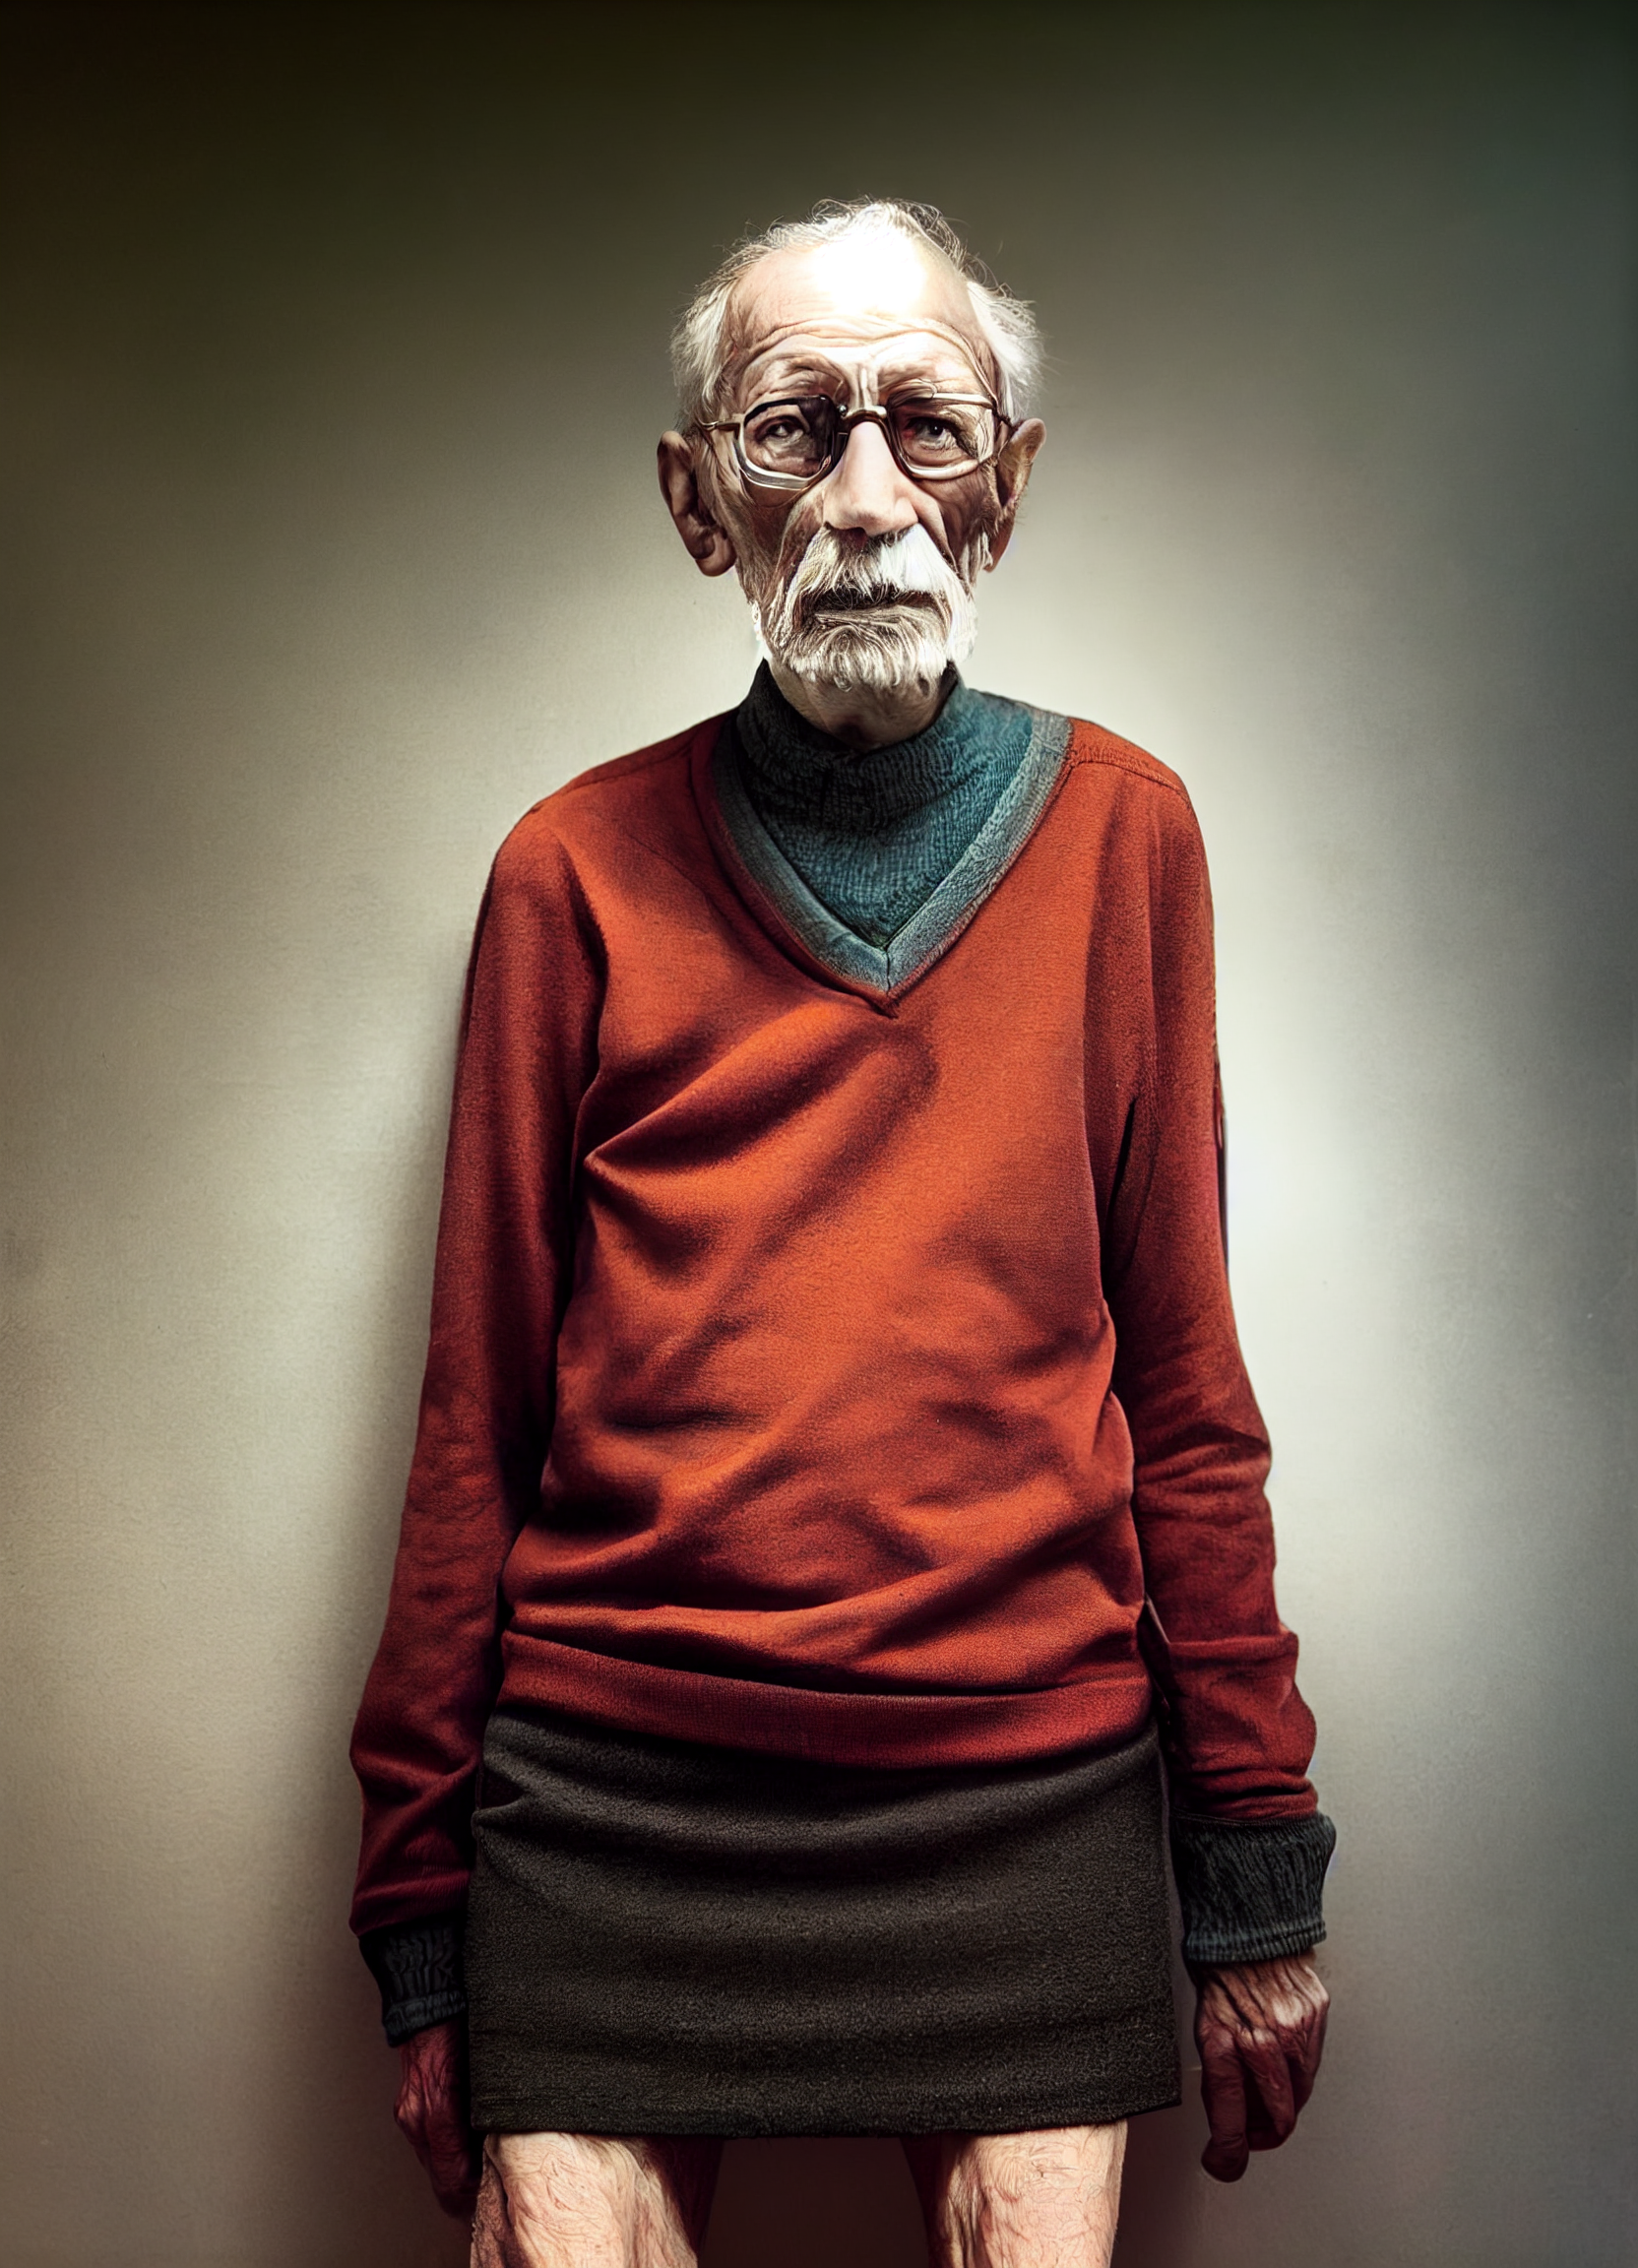 An old man with short hair and glasses wearing a red pullover and a short black skirt.